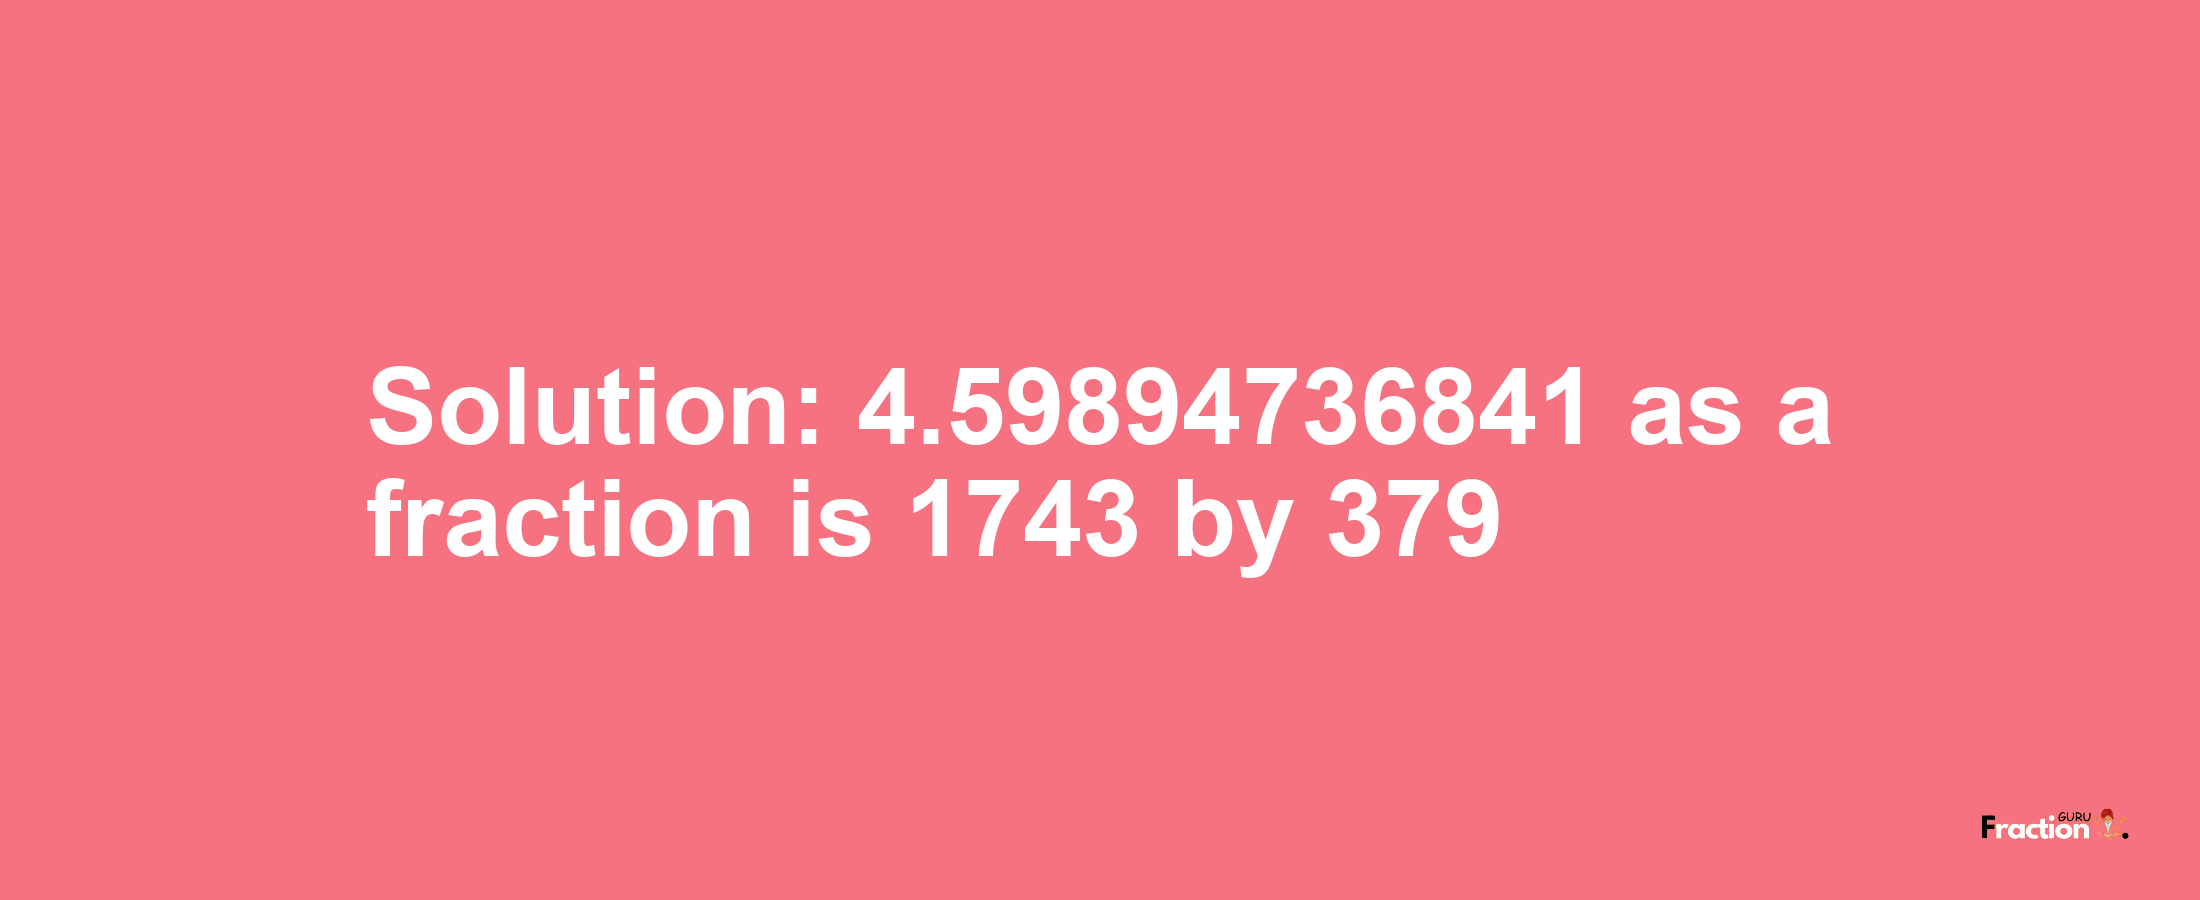 Solution:4.59894736841 as a fraction is 1743/379